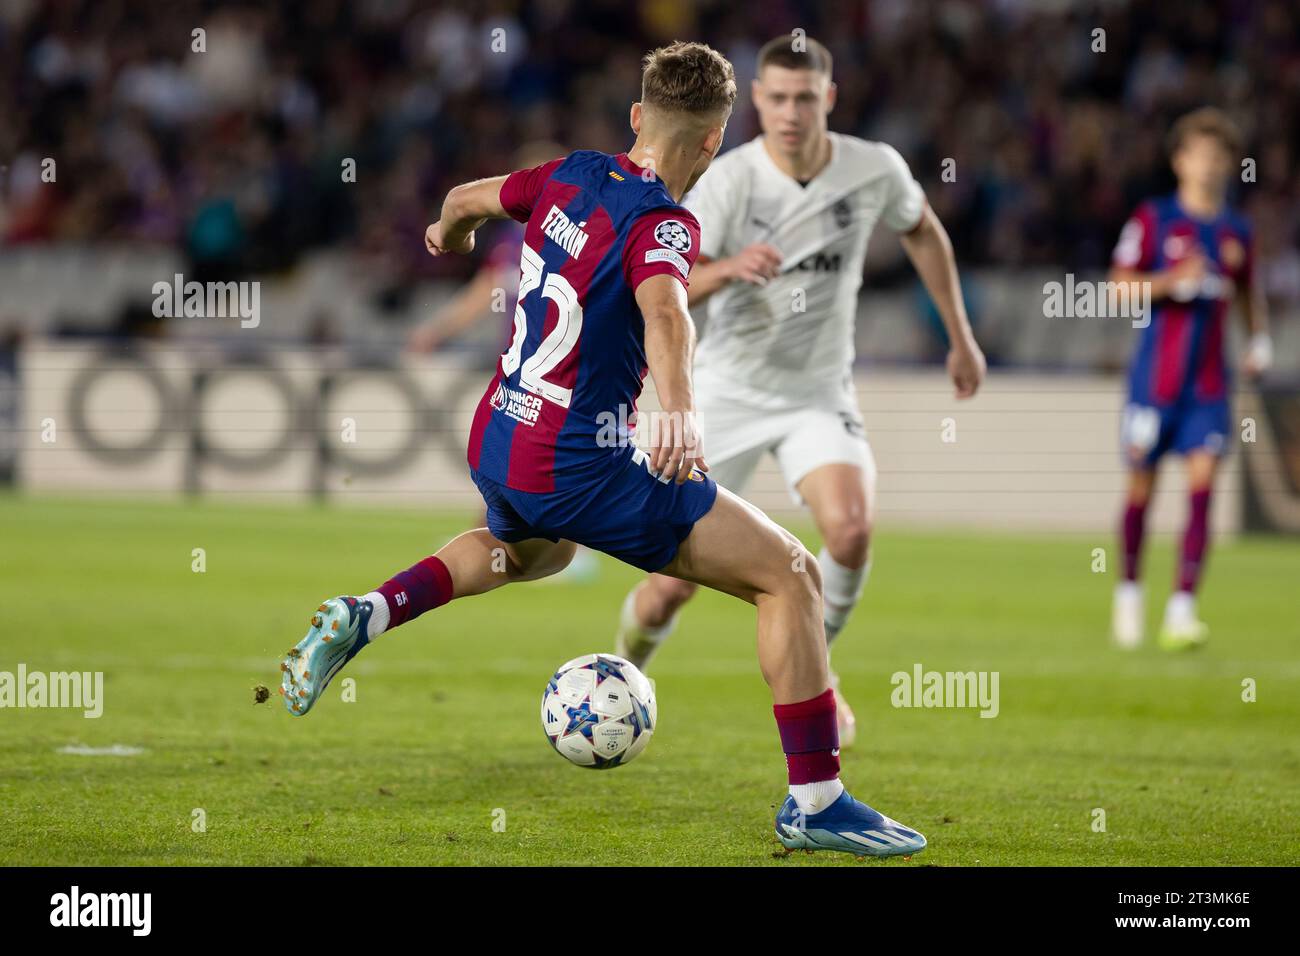 Barcelona, Spain. 25th Oct, 2023. BARCELONA, SPAIN - OCTOBER 25: Fermin Lppez of FC Barcelona during the UEFA Champions League match between FC Barcelona and FC Shakhtar Donetsk at the Estadi Olimpic Lluis Companys on October 25, 2023 in Barcelona, Spain Credit: DAX Images/Alamy Live News Stock Photo